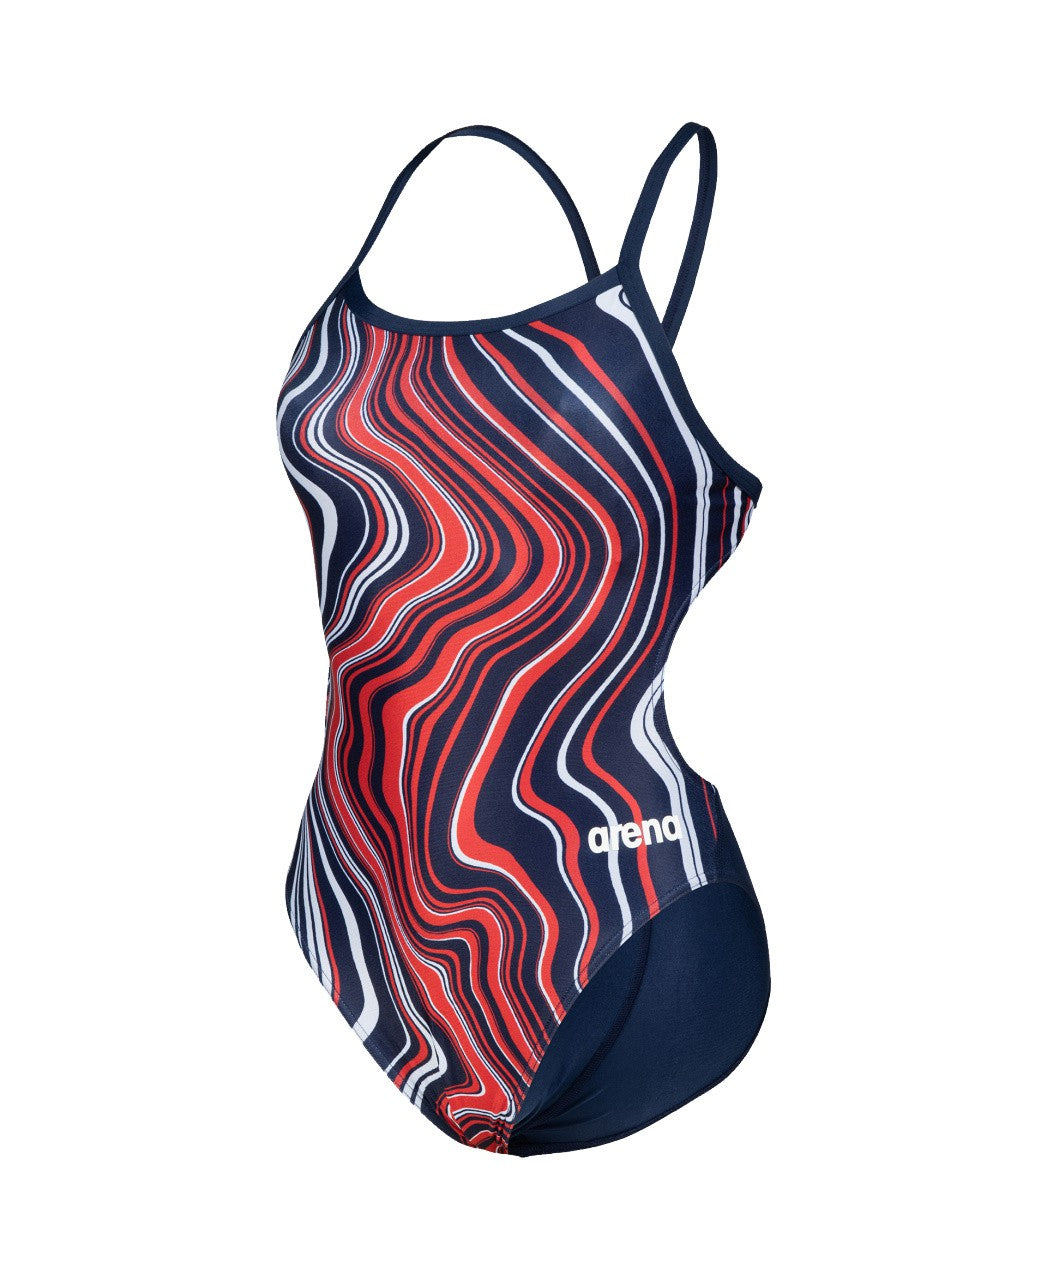 W Swimsuit Challenge Back Marbled navy-redmulti